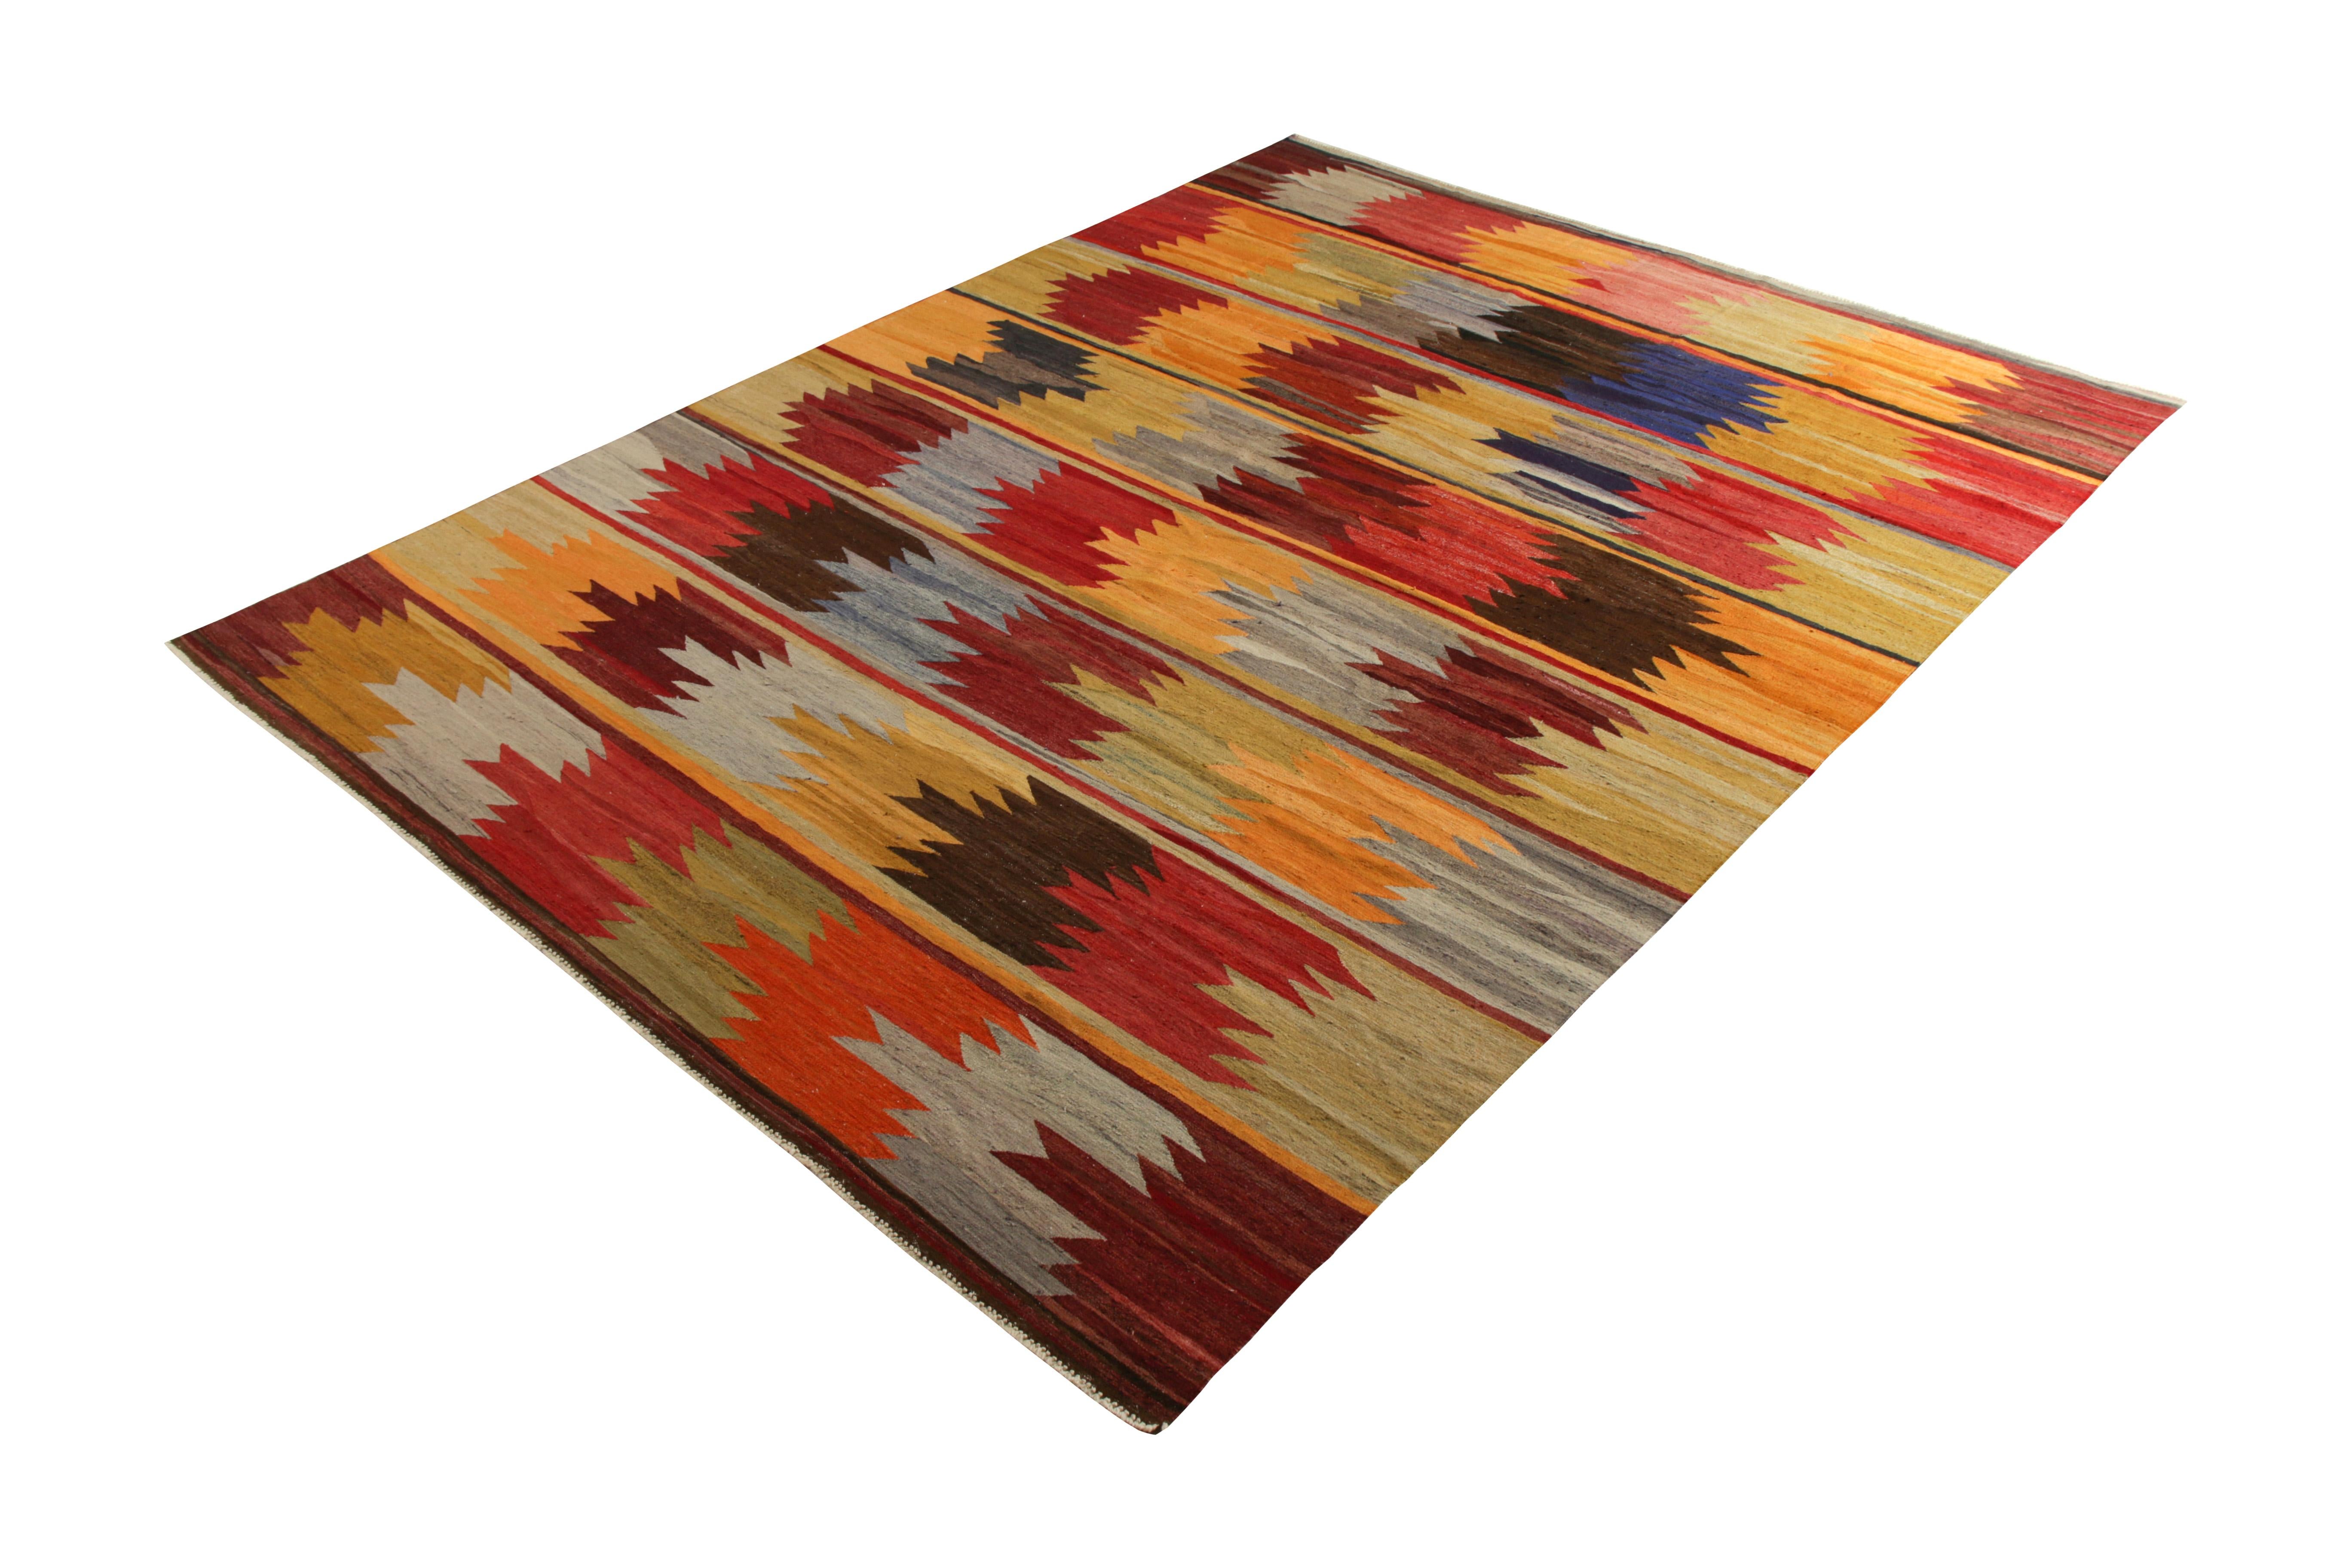 Handwoven in wool originating from Turkey circa 1950-1960, this item is a vintage Kilim rug connoting a midcentury Anatolian rug design emerging in this period, known for producing modern, almost maximalist rugs in the plays of color and pattern.